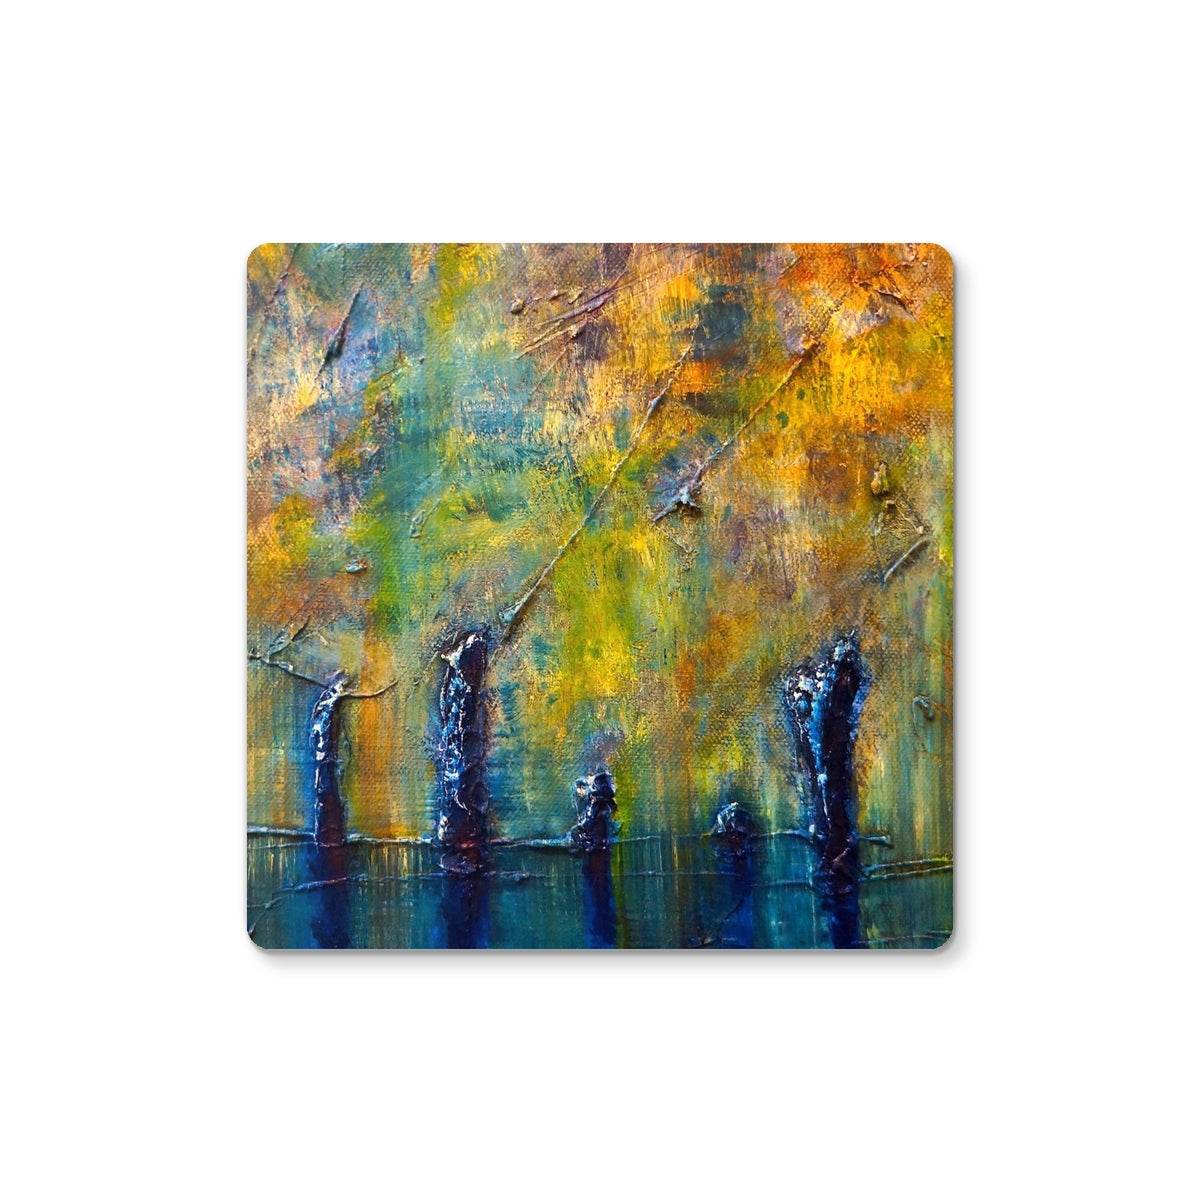 Stenness Moonlight Orkney Art Gifts Coaster-Coasters-Orkney Art Gallery-4 Coasters-Paintings, Prints, Homeware, Art Gifts From Scotland By Scottish Artist Kevin Hunter